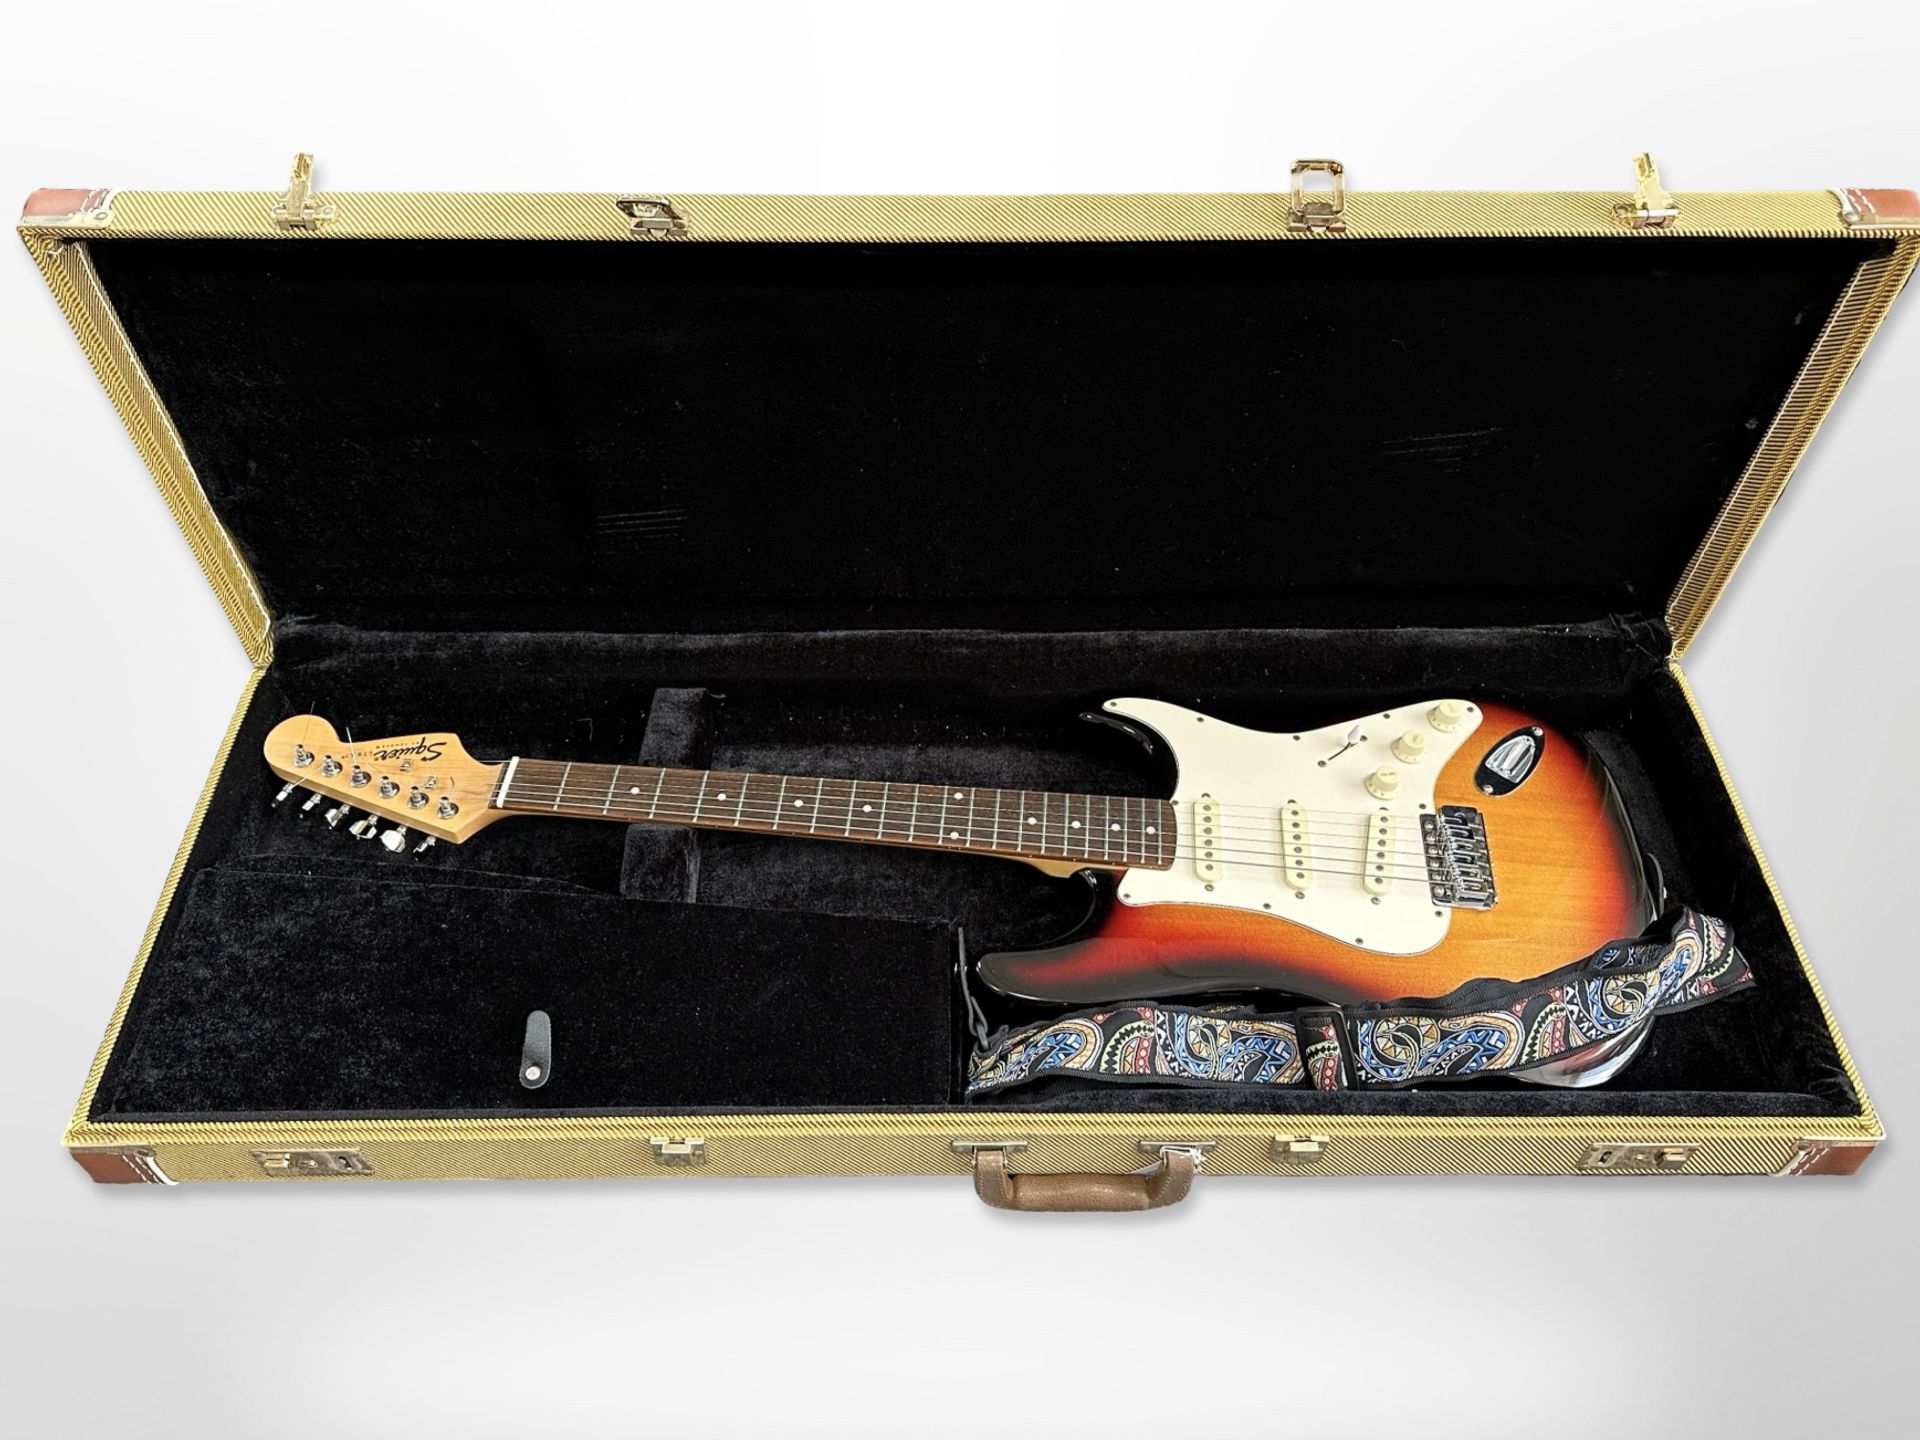 A Squire by Fender electric strat guitar, in fitted Rockcase,